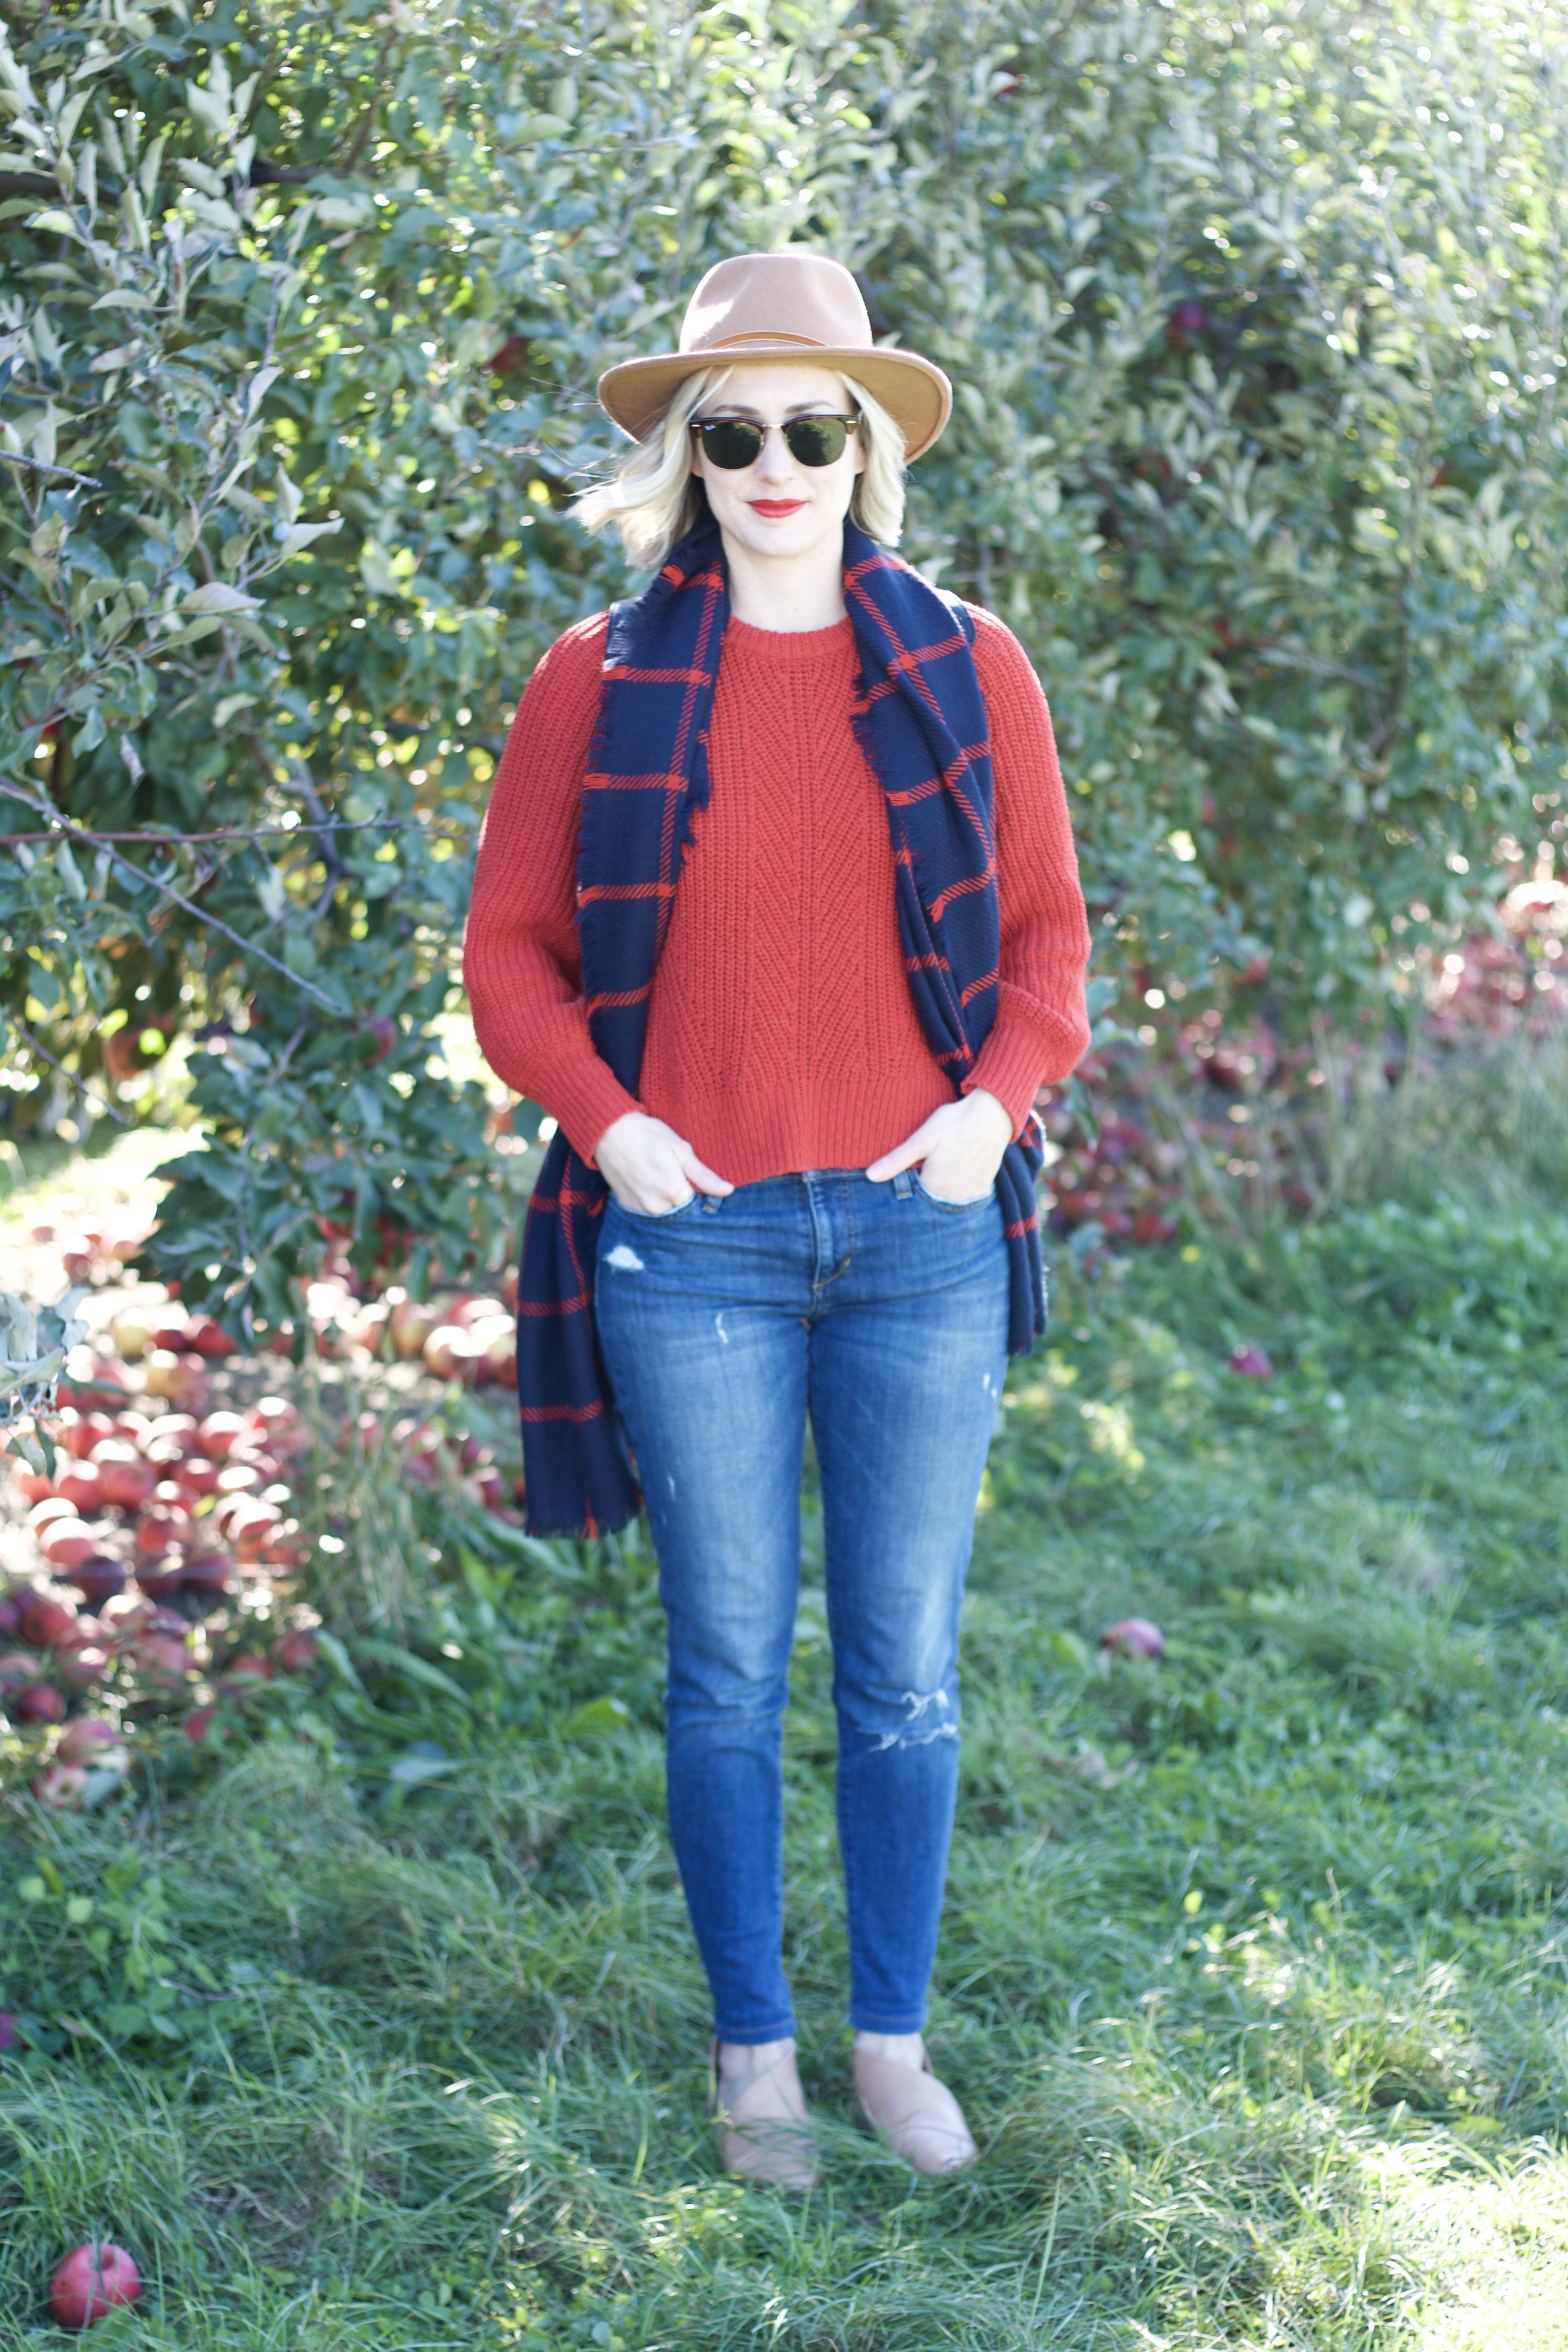 Madewell sweater, tan felt hat, plaid blanket scarf, apple picking outfit, shooties, mini backpack